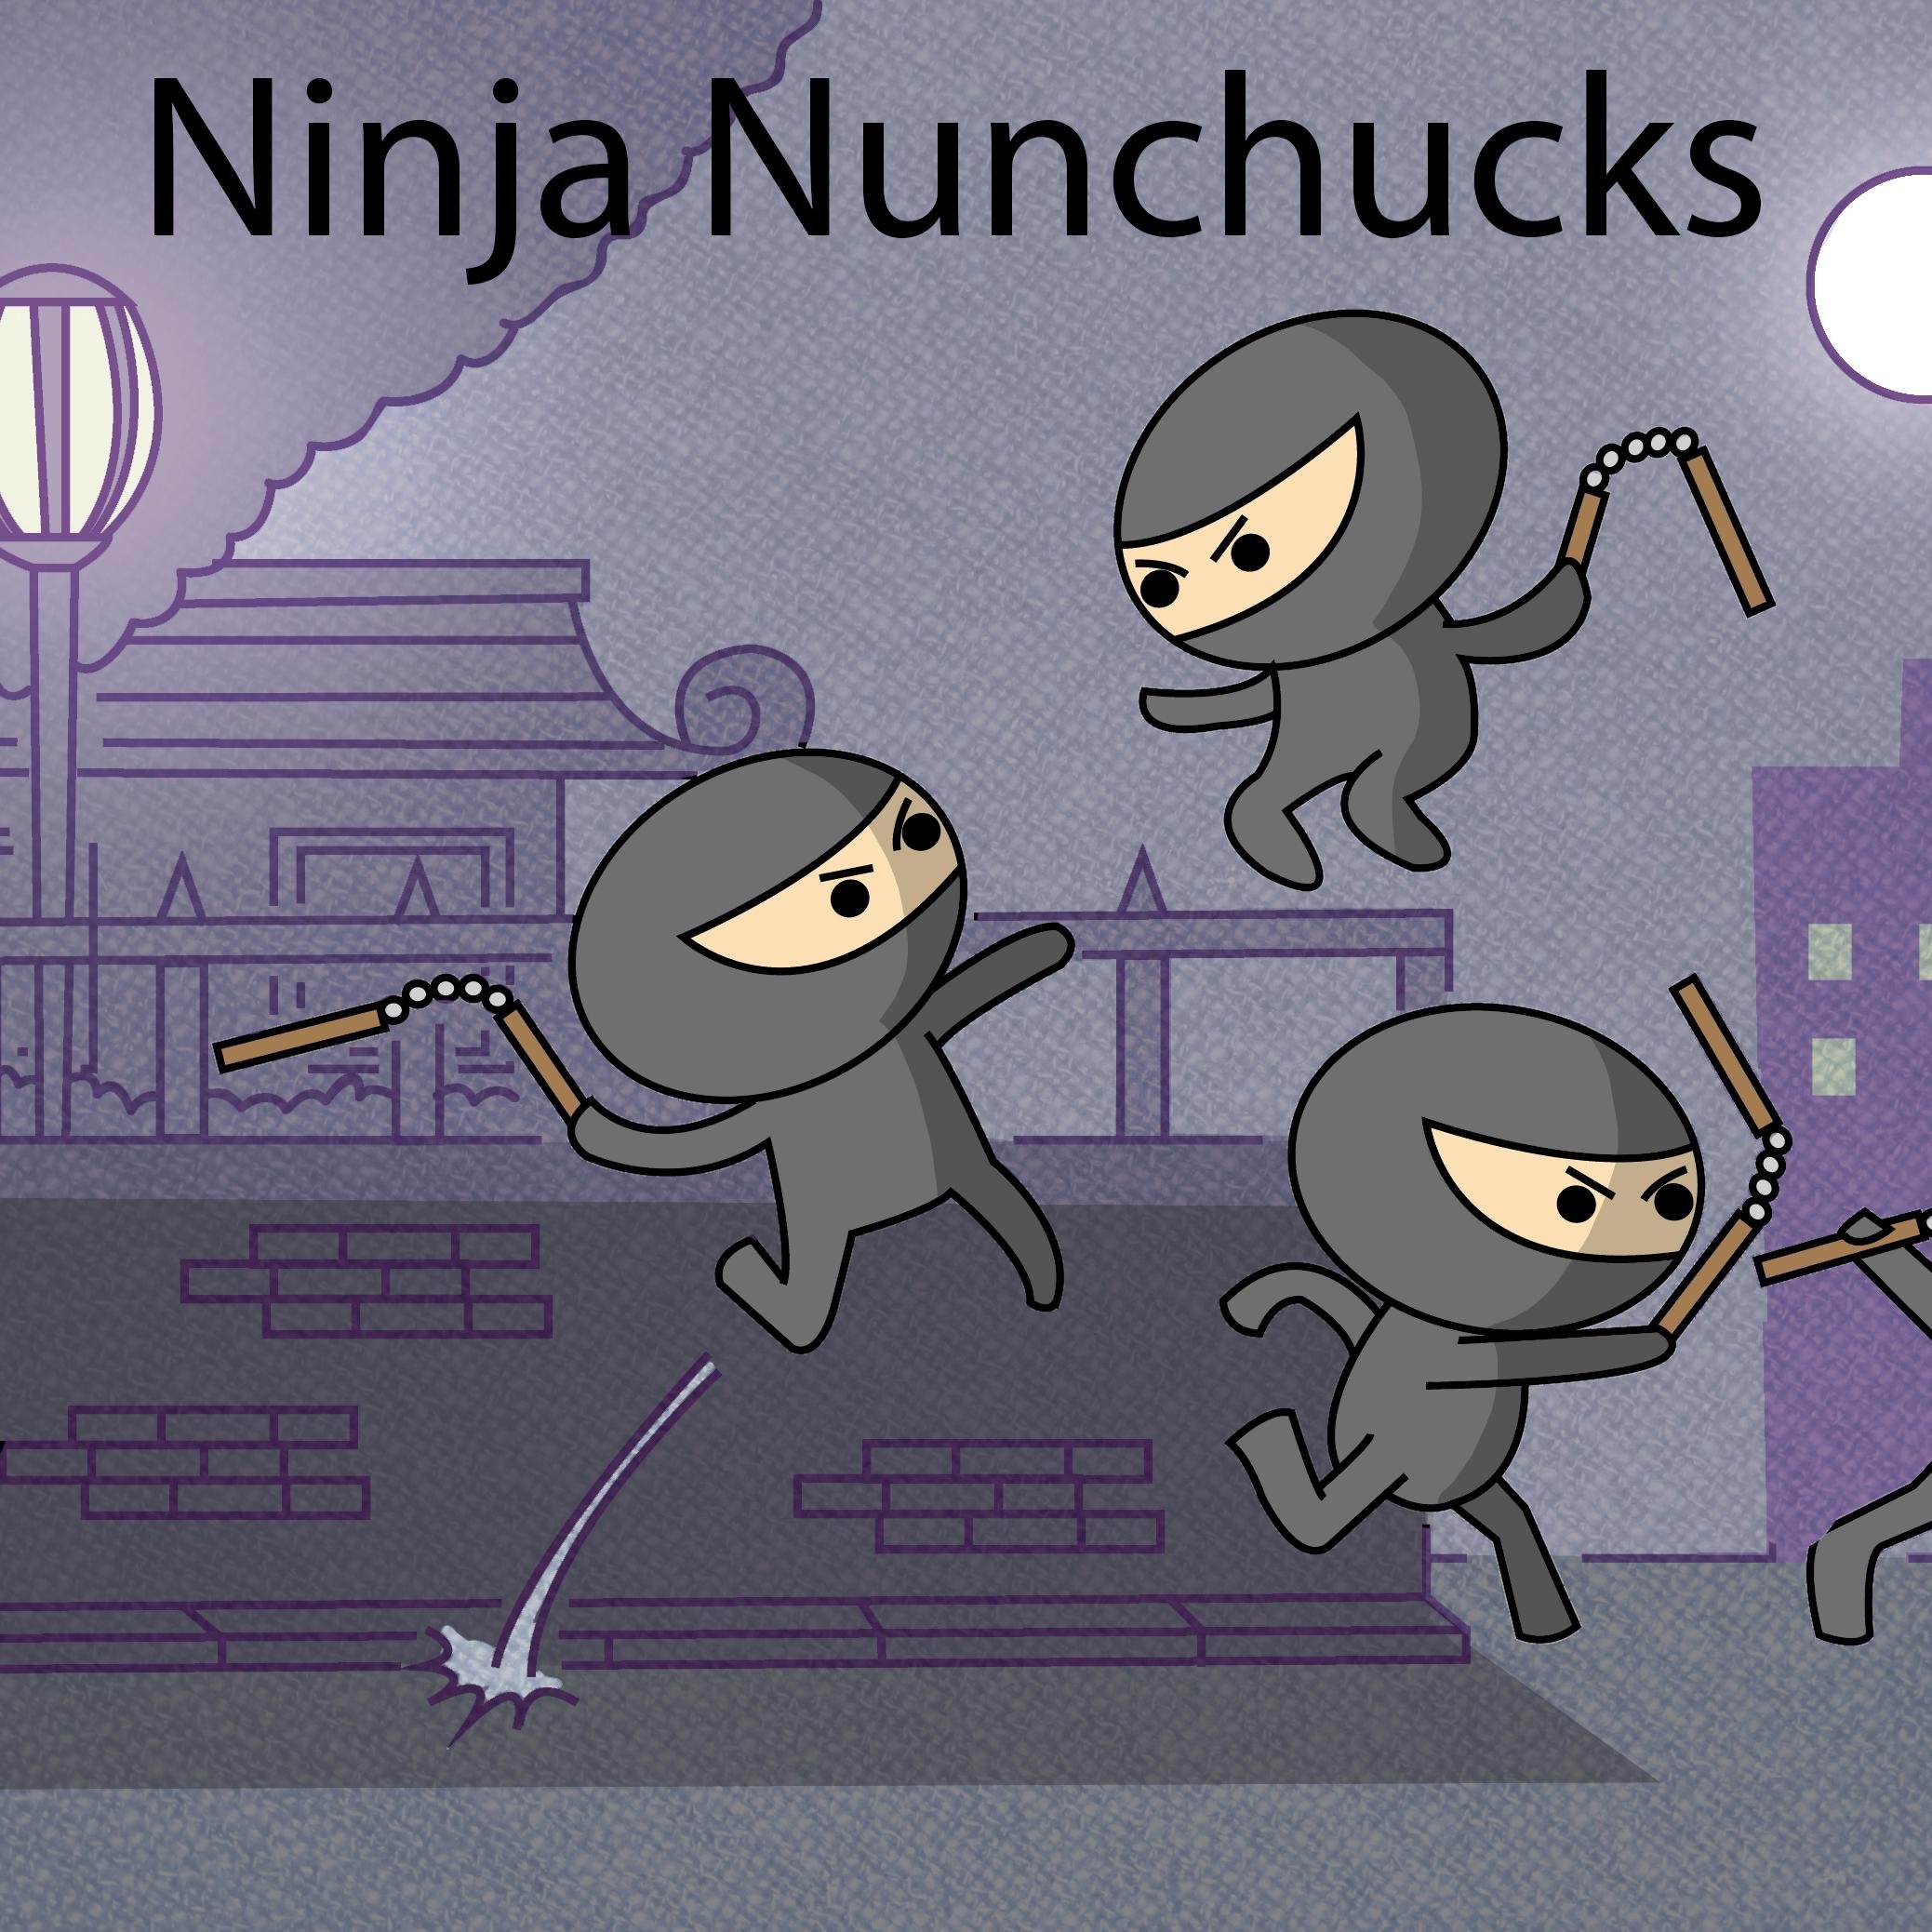 All of the Coolest Nunchucks in One Fun and Easy Spot!